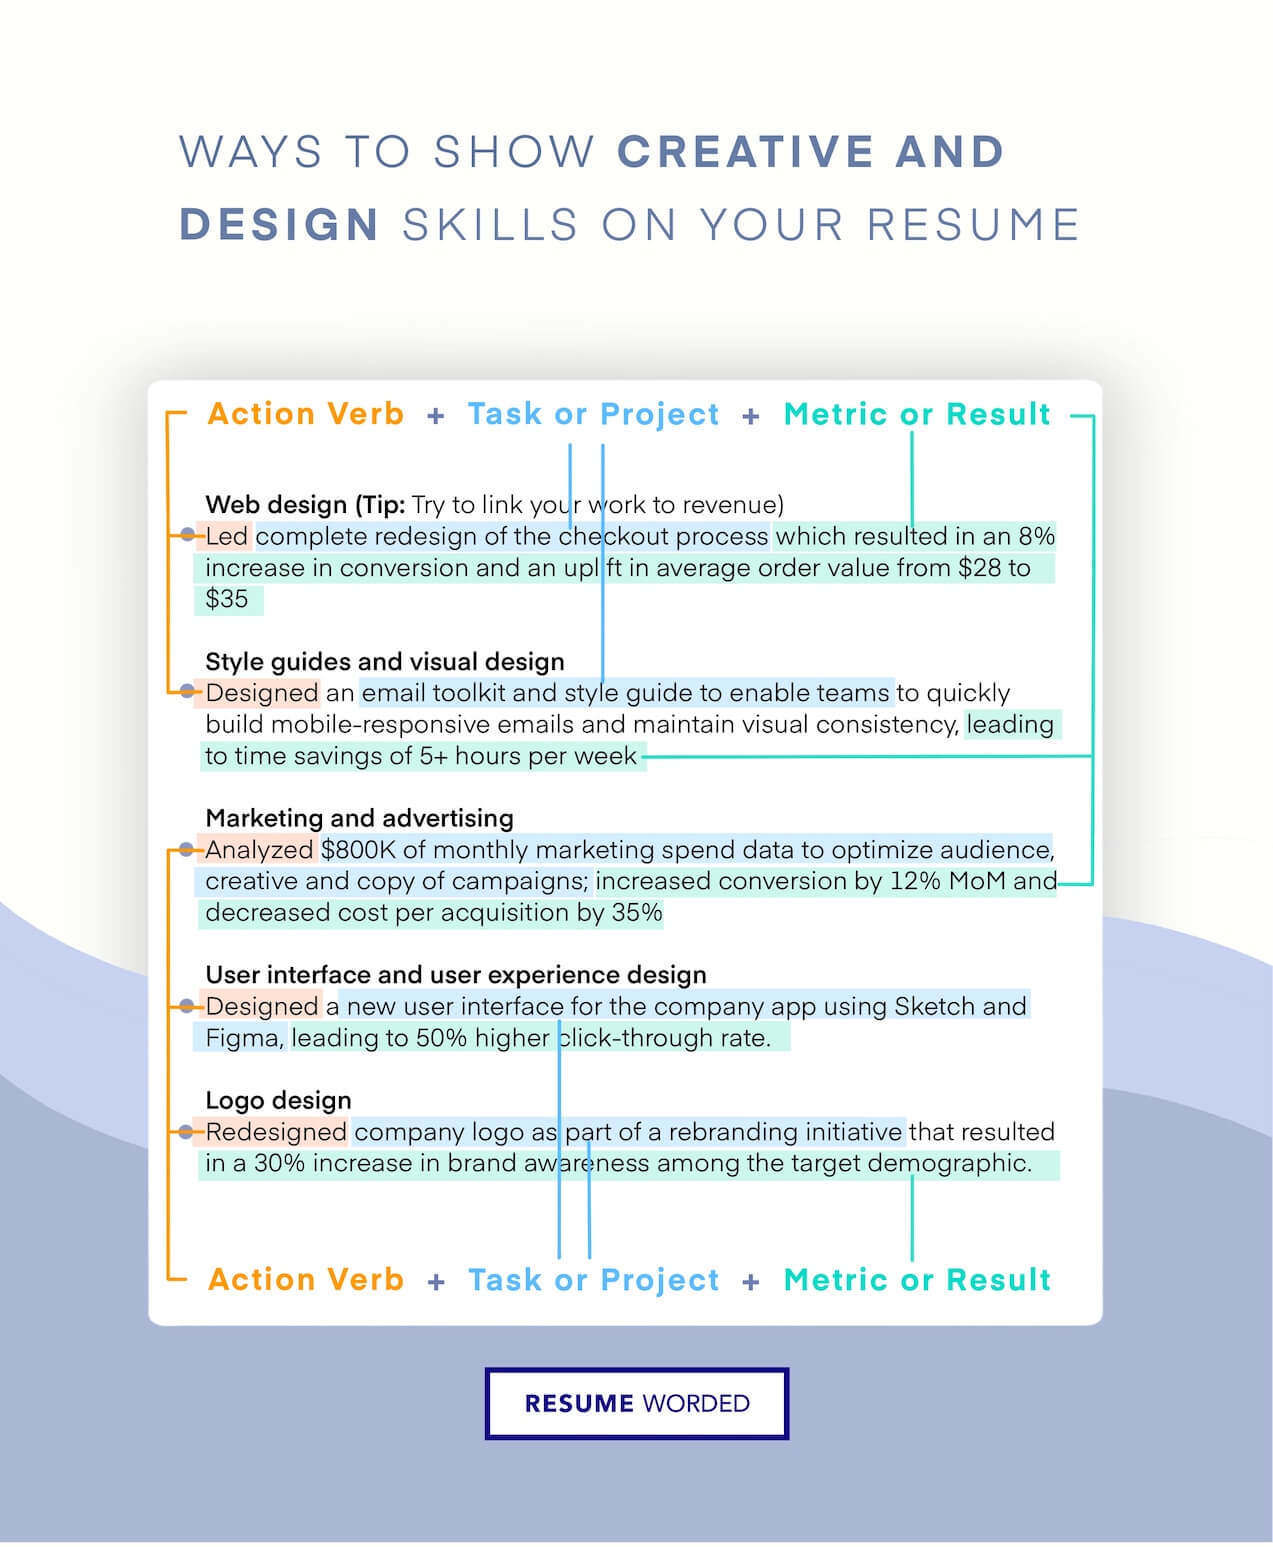 Broad coverage of technical skills relating to creative directors - Creative Director Resume